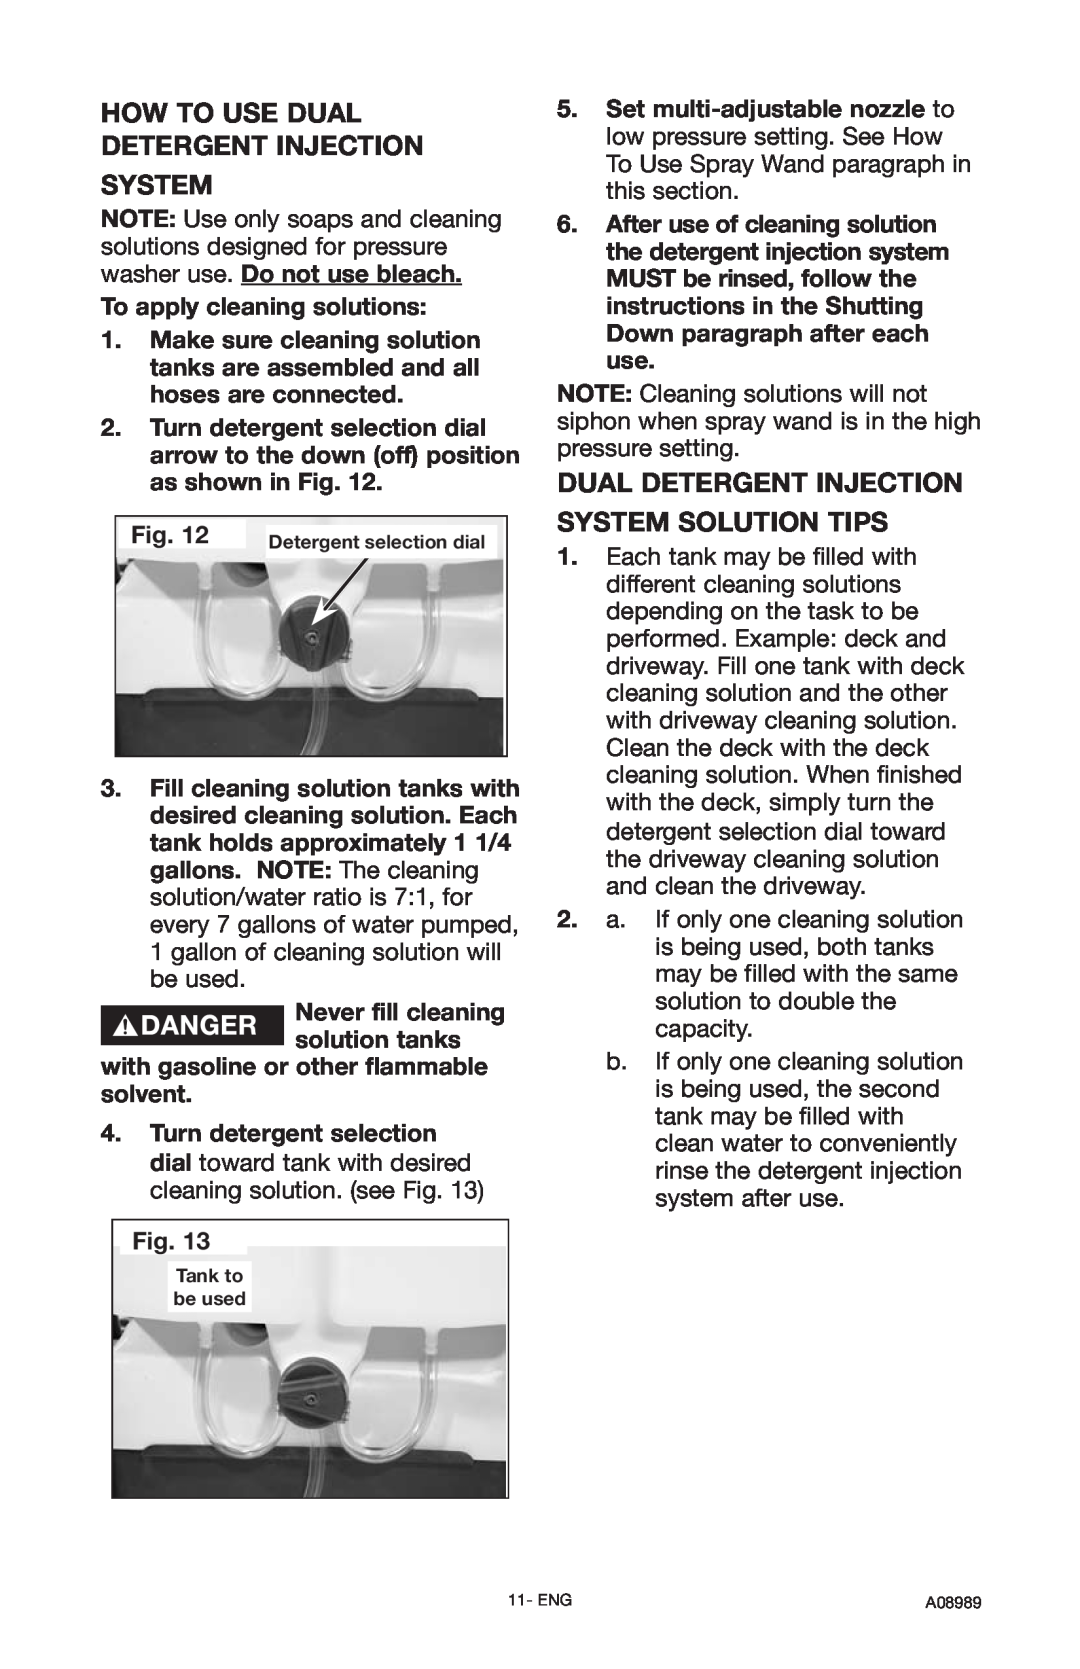 DeVillbiss Air Power Company A08989, S2600 important safety instructions How To Use Dual Detergent Injection System 